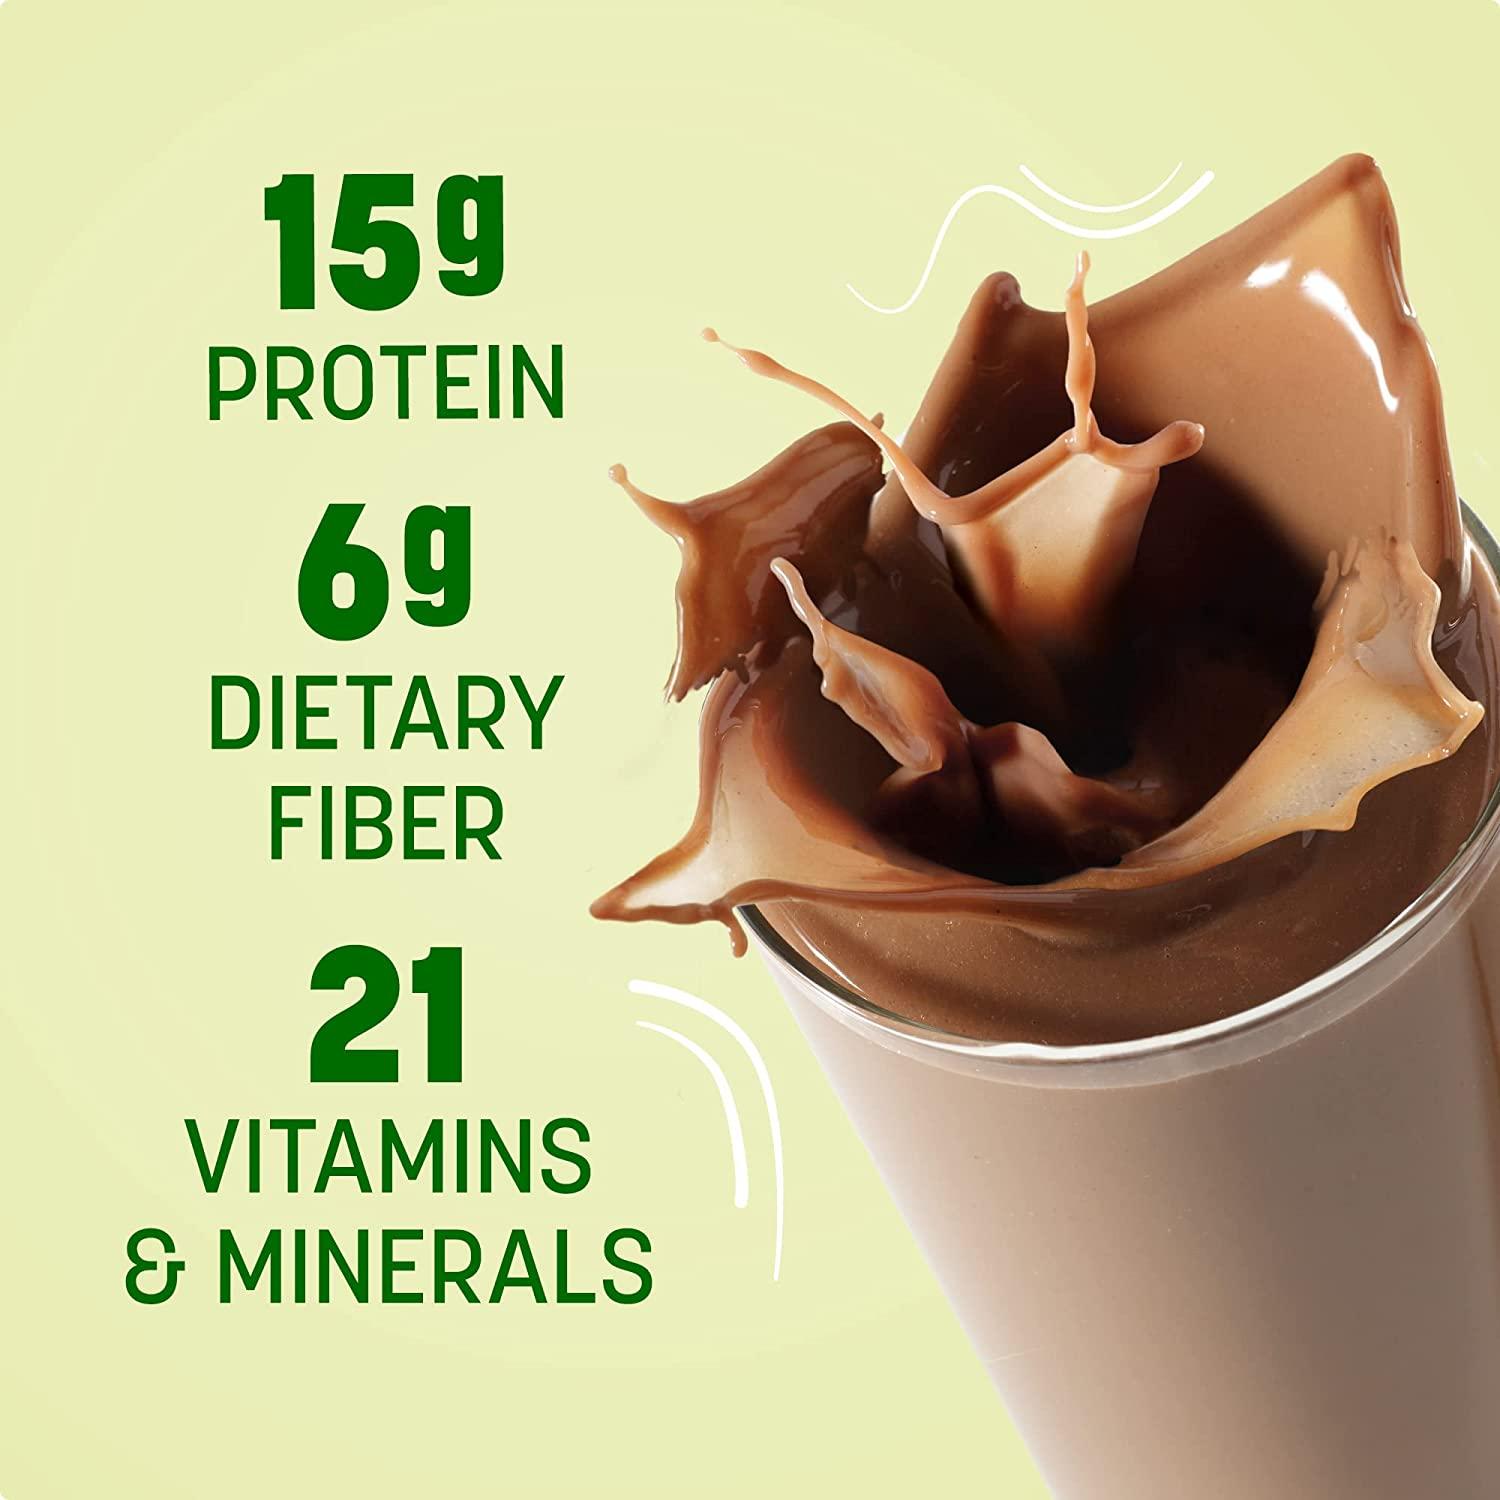 Nutrisystem ProSync Chocolate Meal Replacement Protein Shake Mix